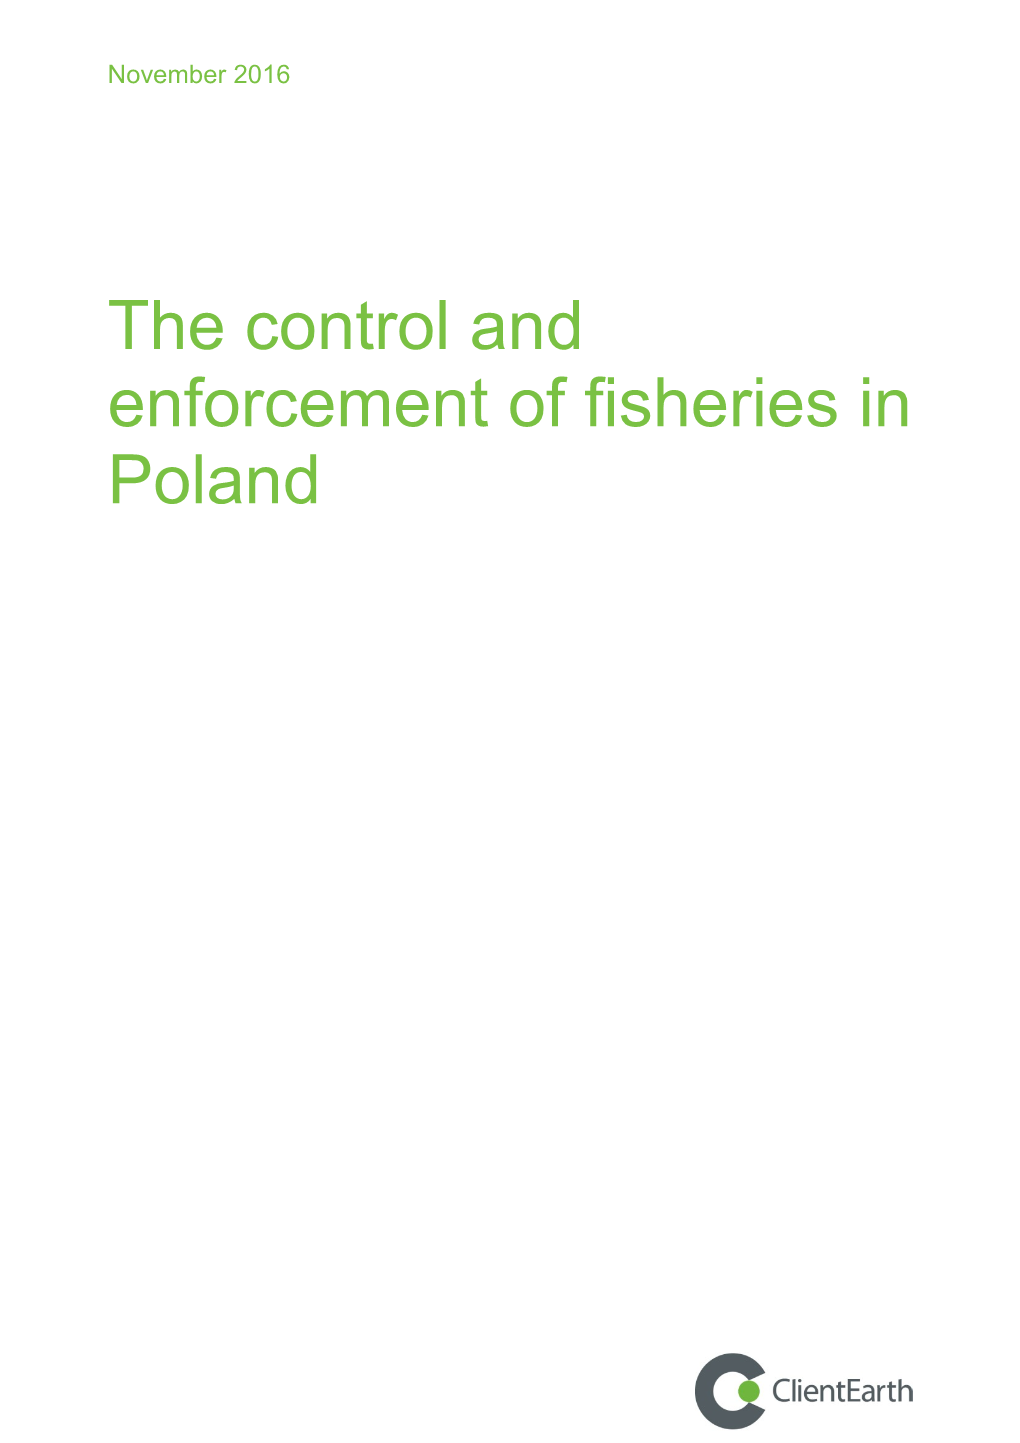 The Control and Enforcement of Fisheries in Poland